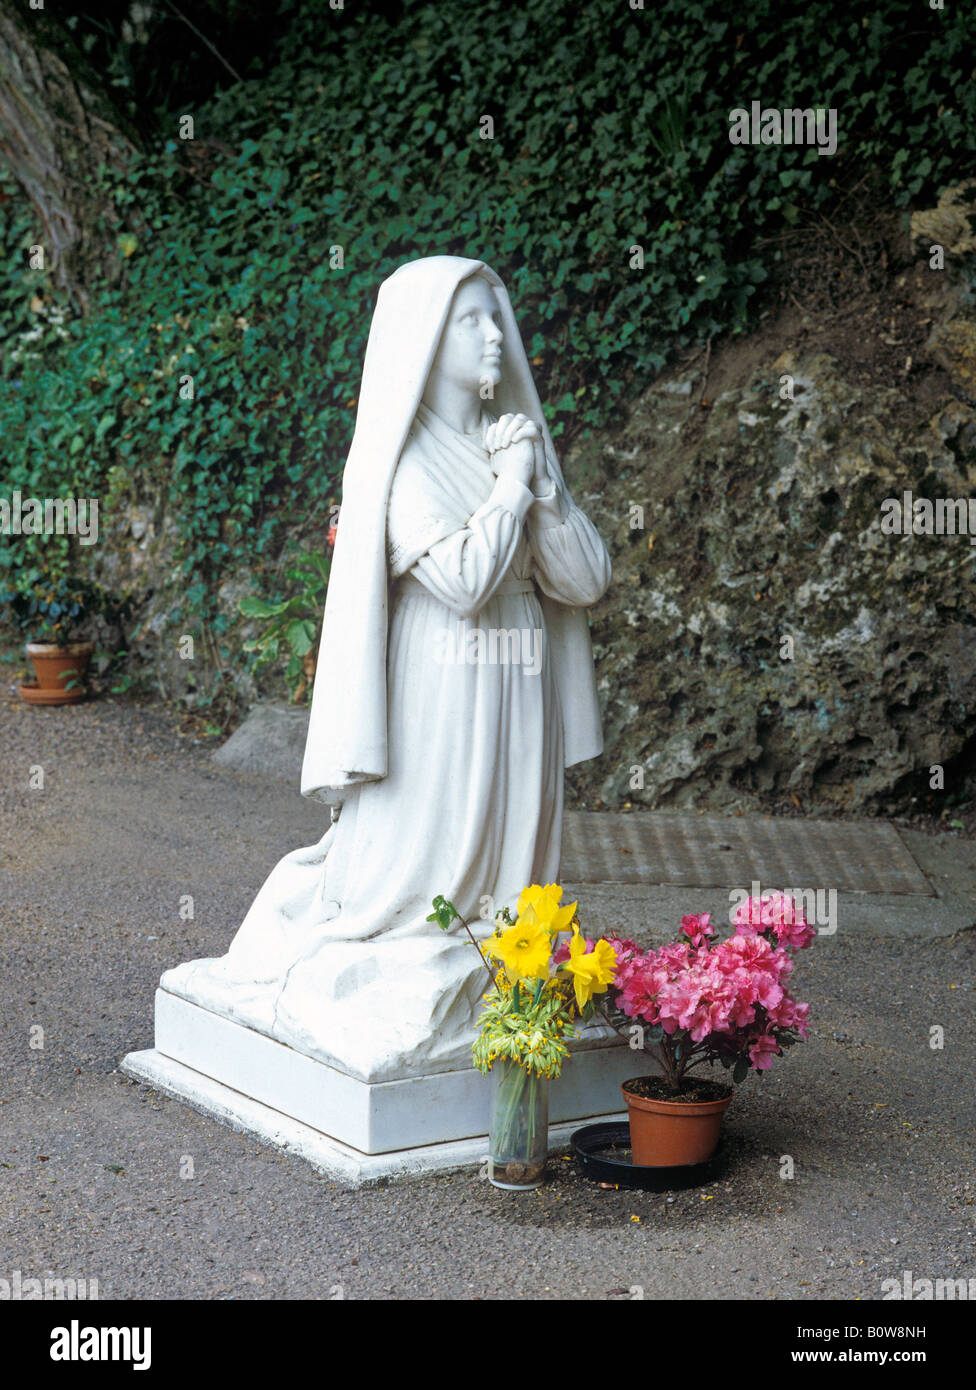 Statue of St. Bernadette of Lourdes in a Lourdes grotto, St. Gildard Monastery Museum, Nevers, Nievre Department, France, Europe Stock Photo